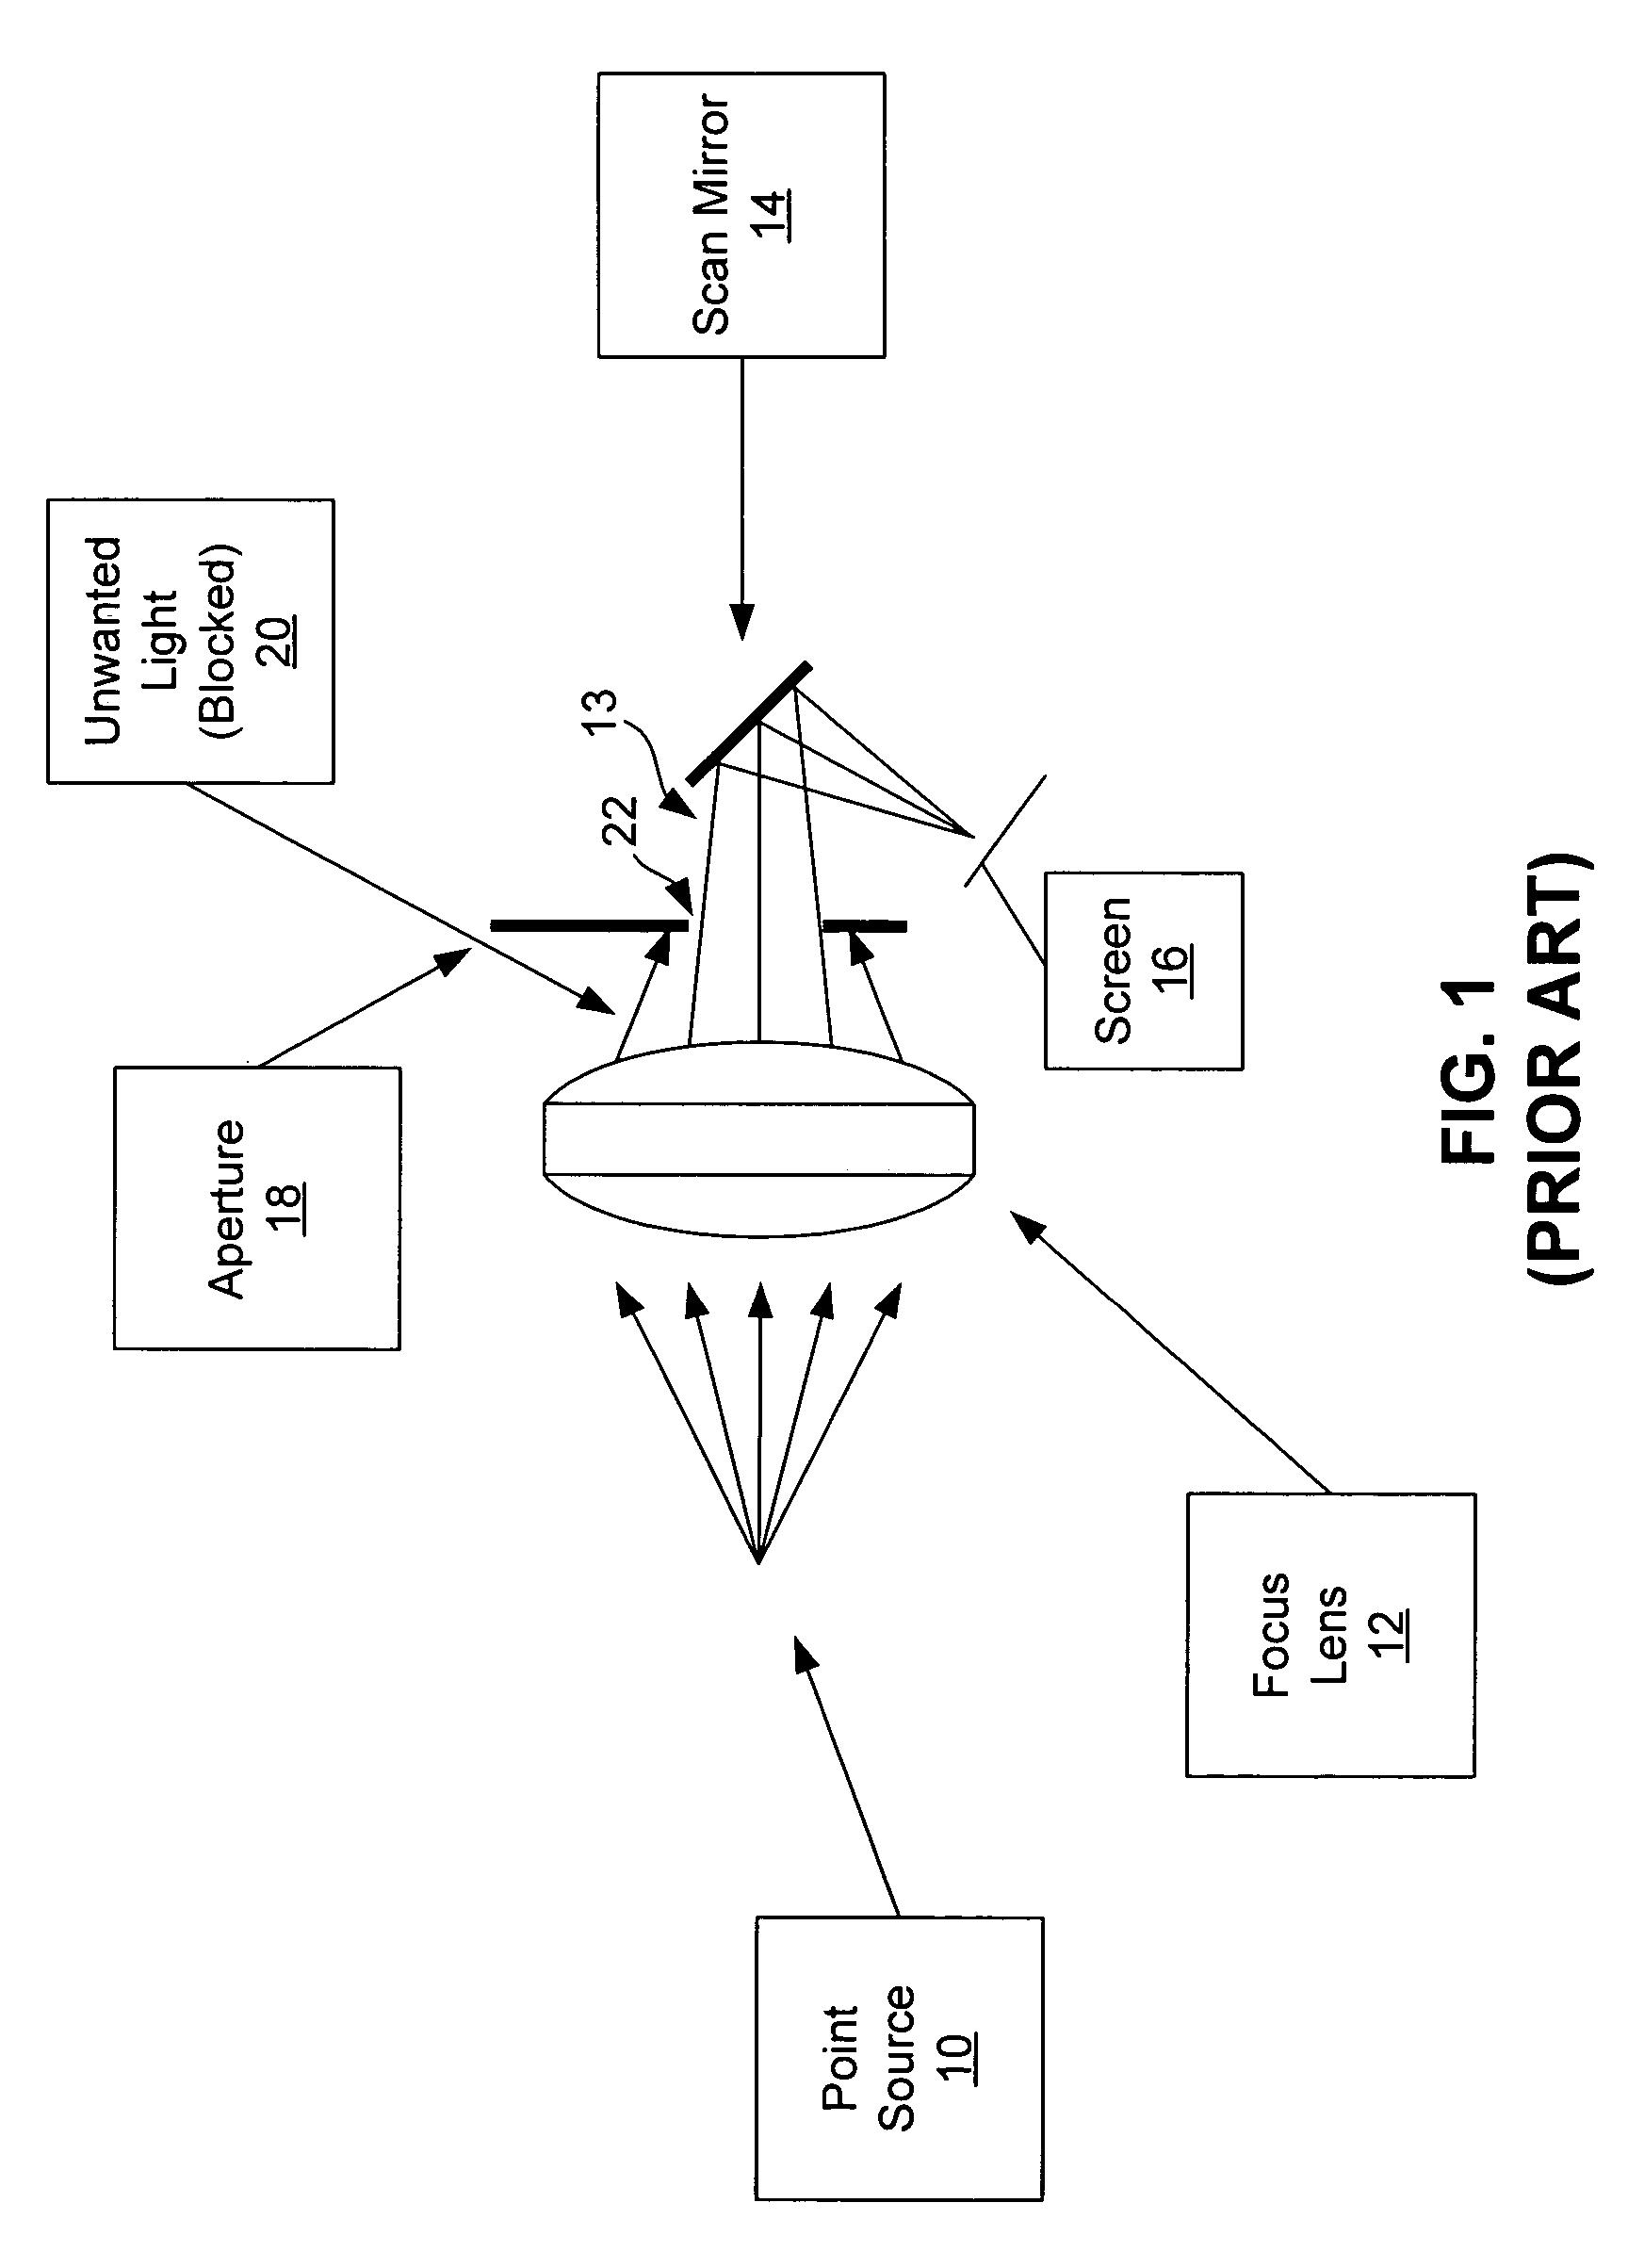 Aperture plate and related system and method